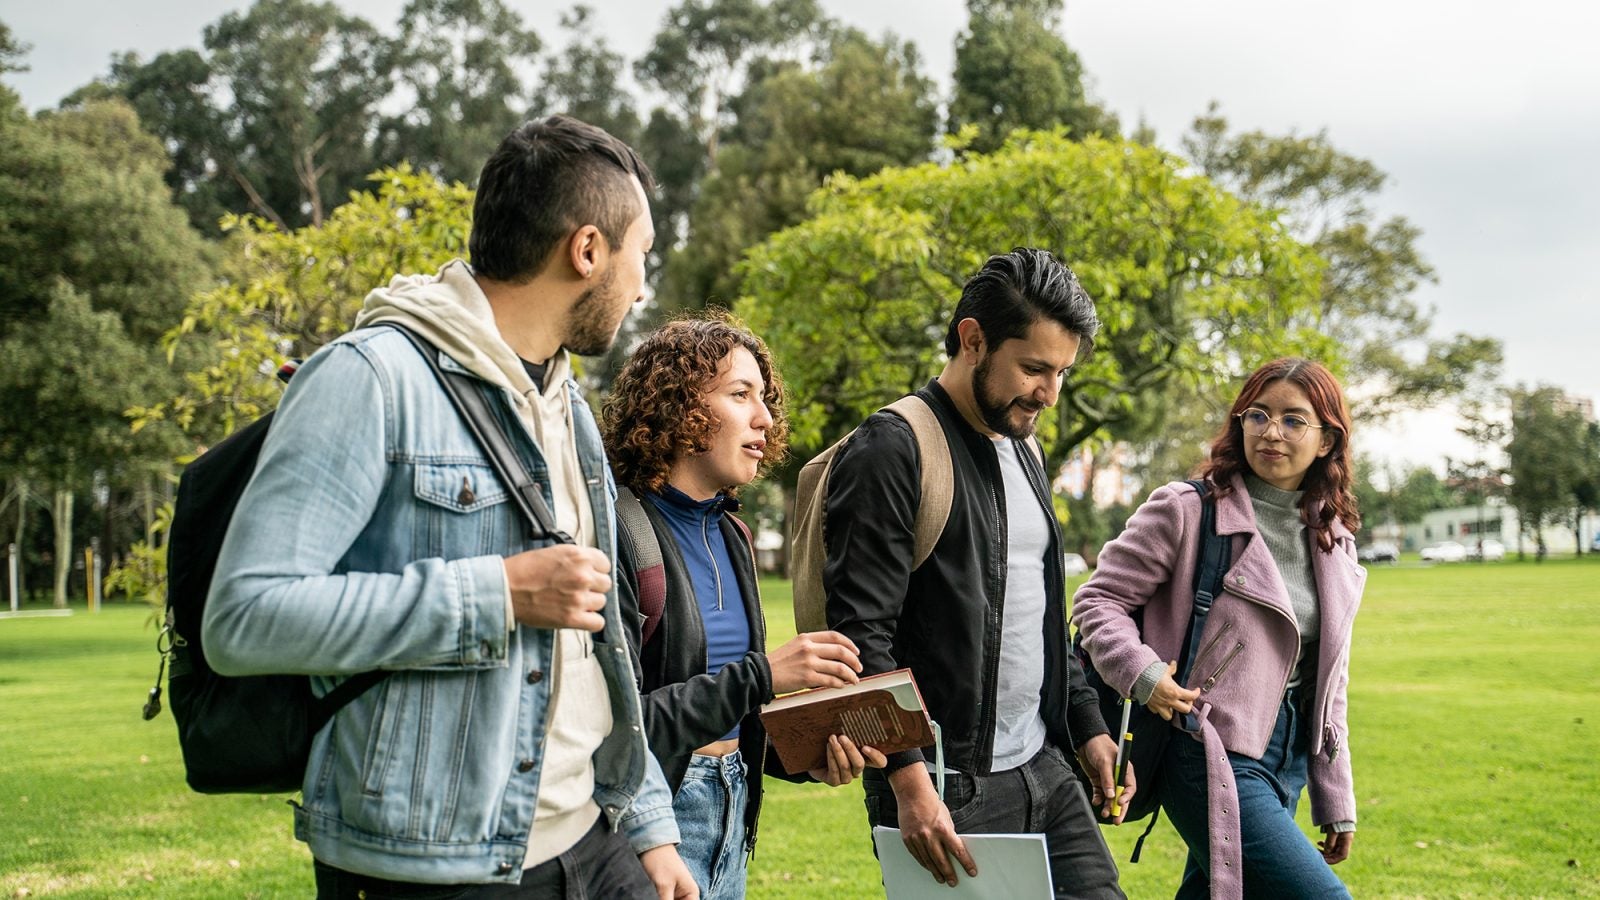 Four Latino college students walk and talk to each other on a college campus